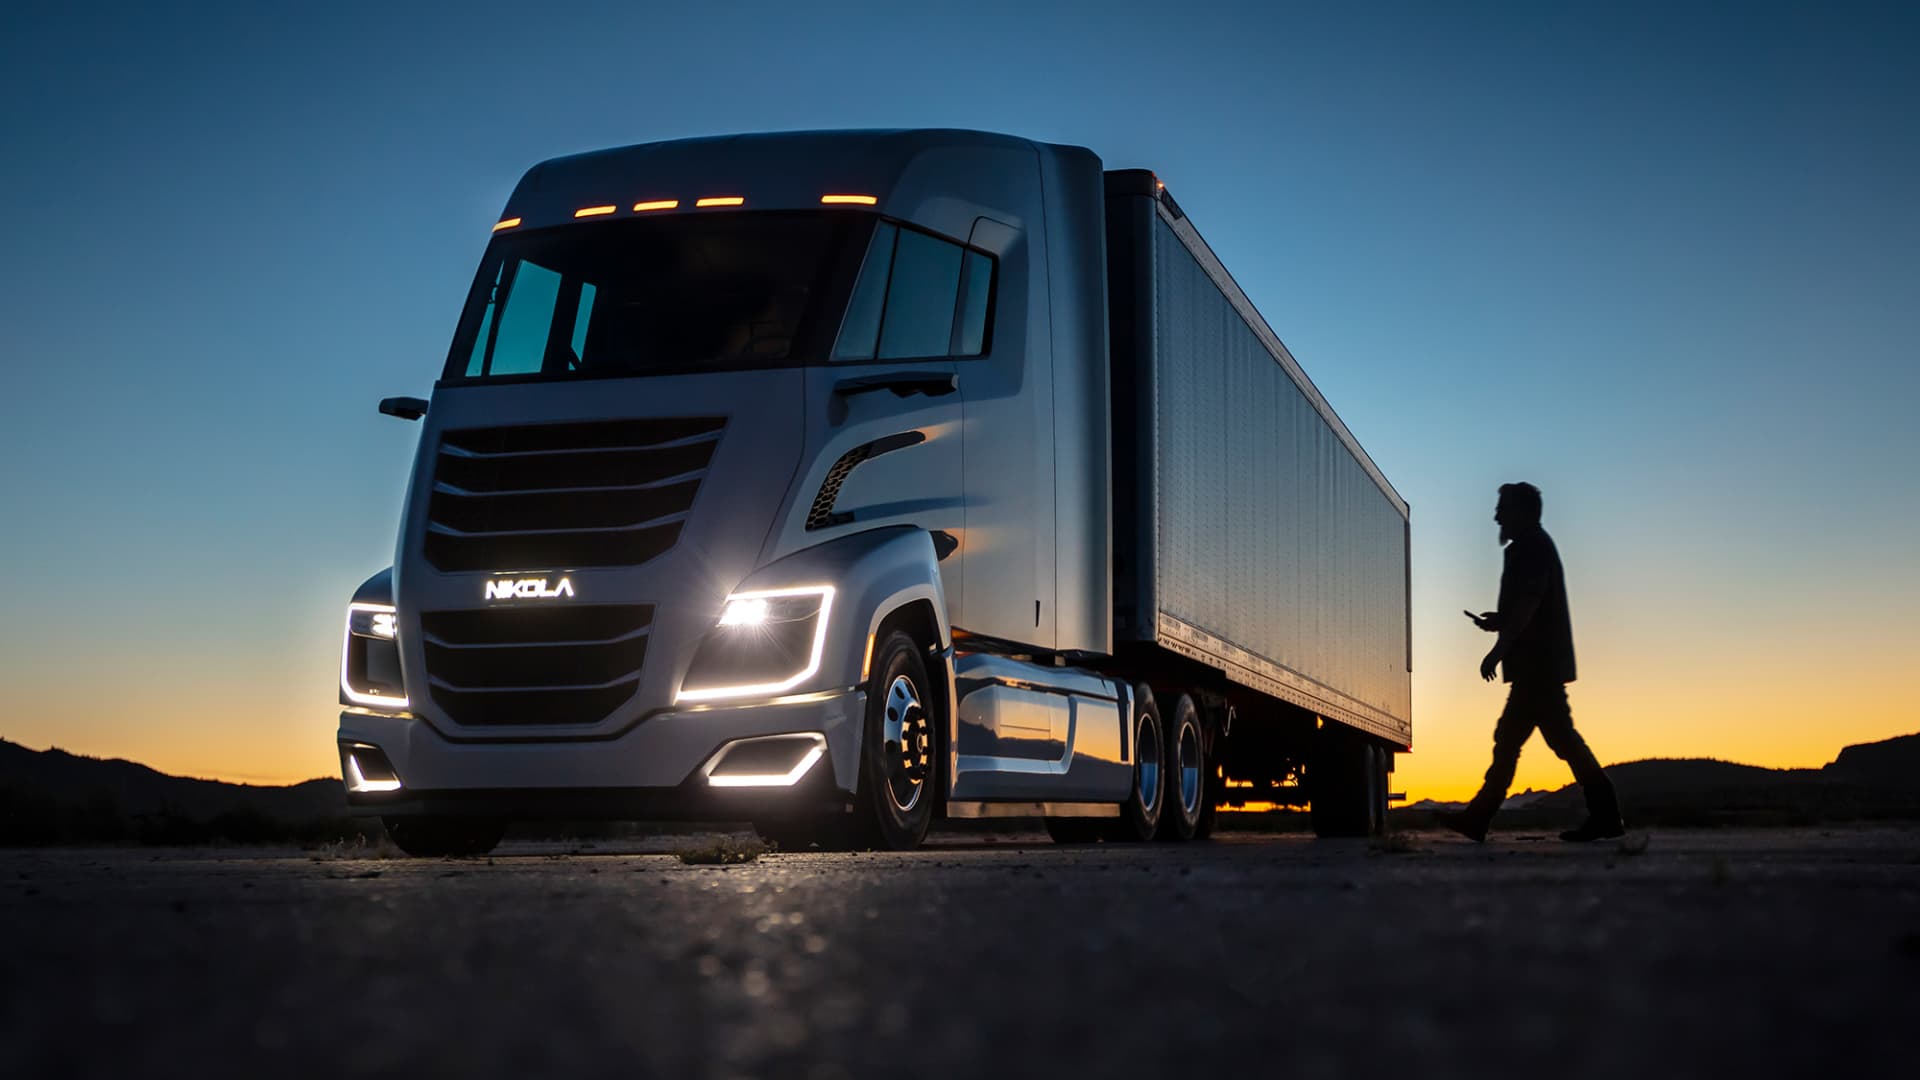 Nikola will offer a hands-free highway driving system for its trucks starting next year